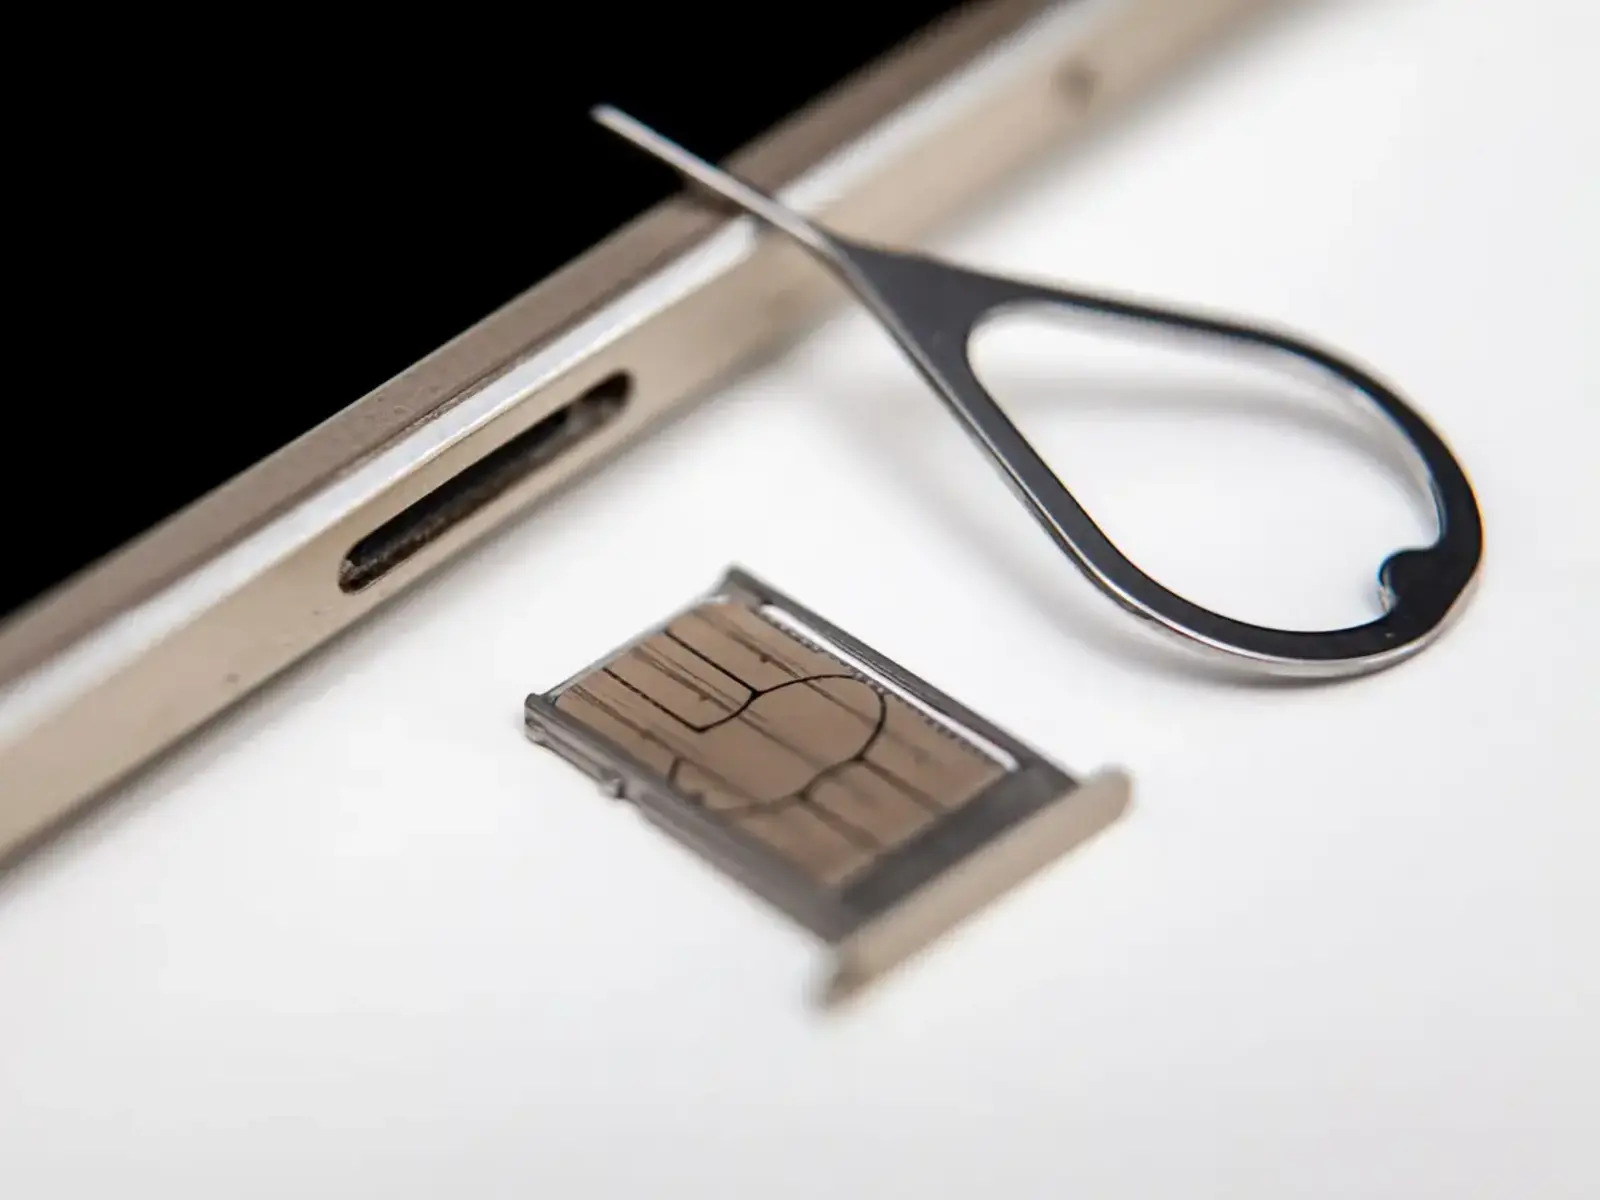 SIM Card Removal: Taking Out The SIM Card From IPhone 13